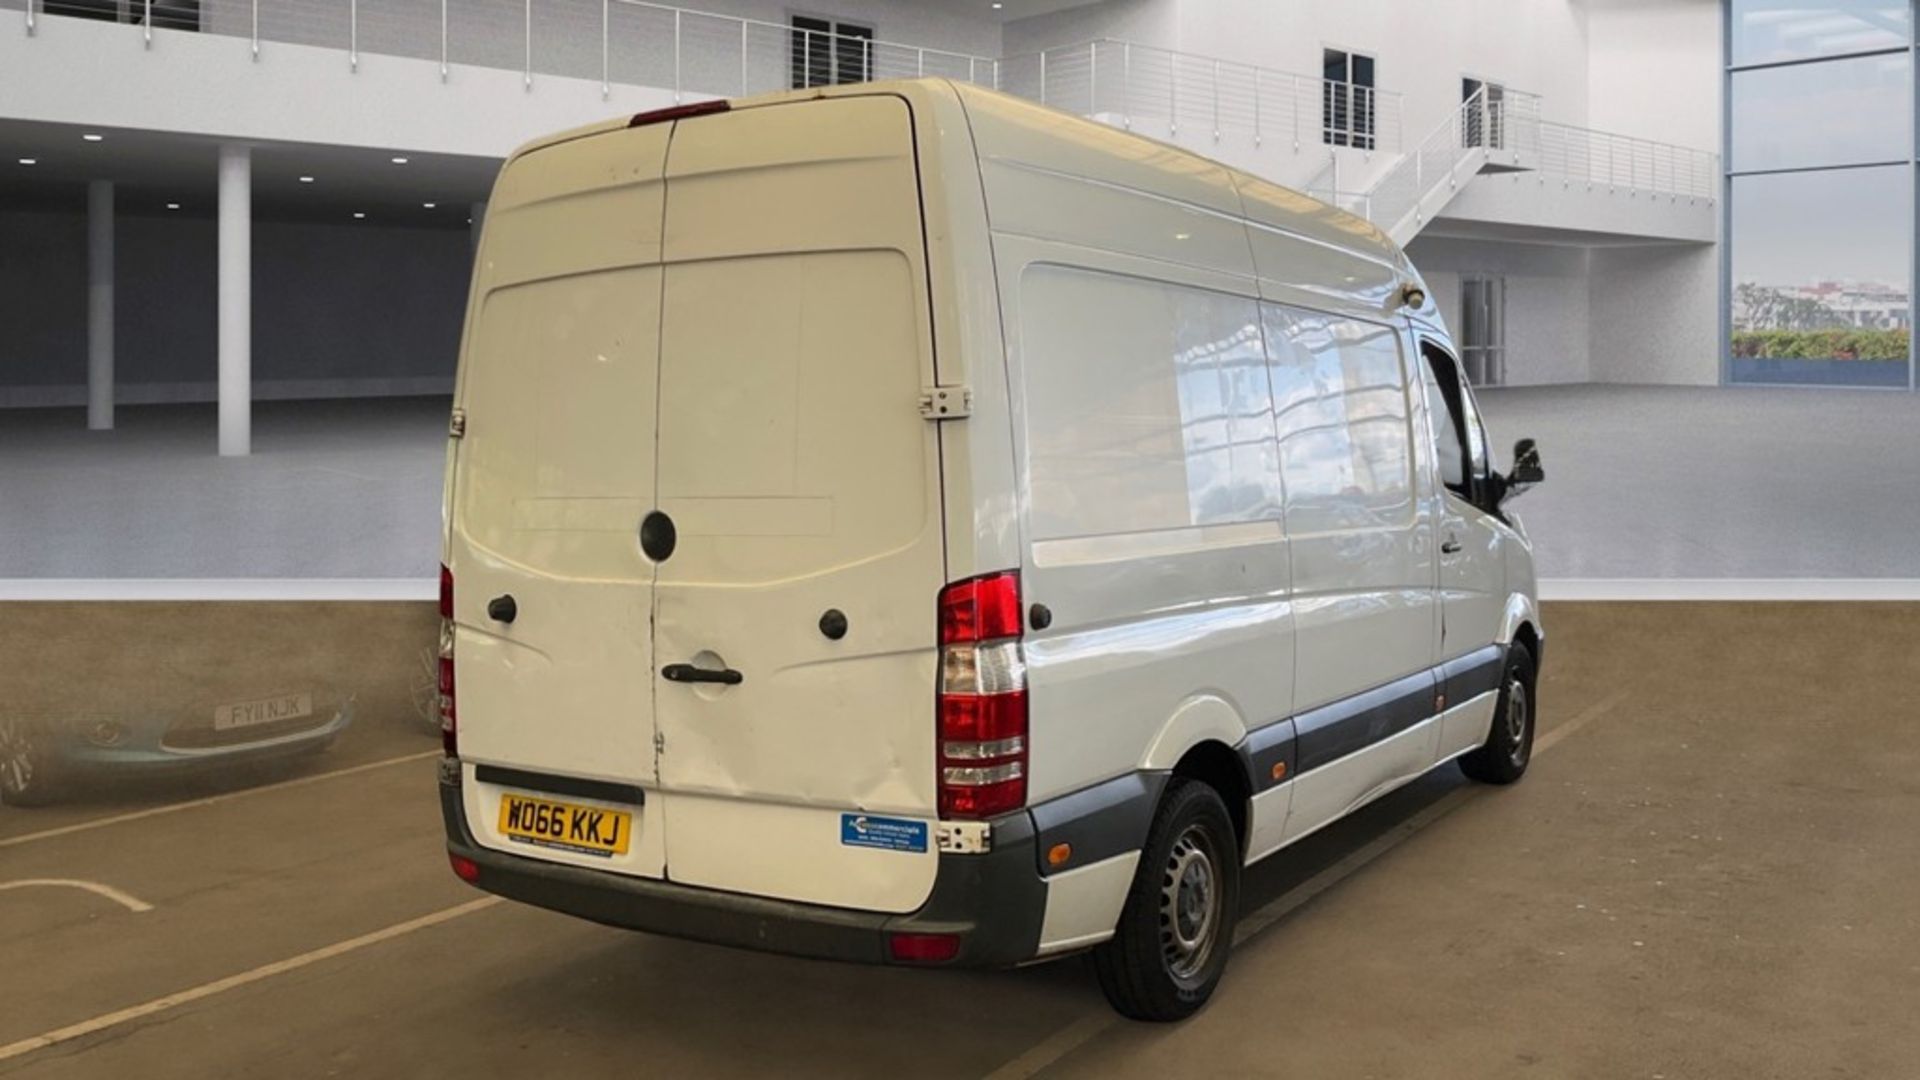 ** ON SALE ** Mercedes-Benz Sprinter 314 2.1 CDI 3.5t MWB Refrigerated 2017(66 Reg) - Image 4 of 8